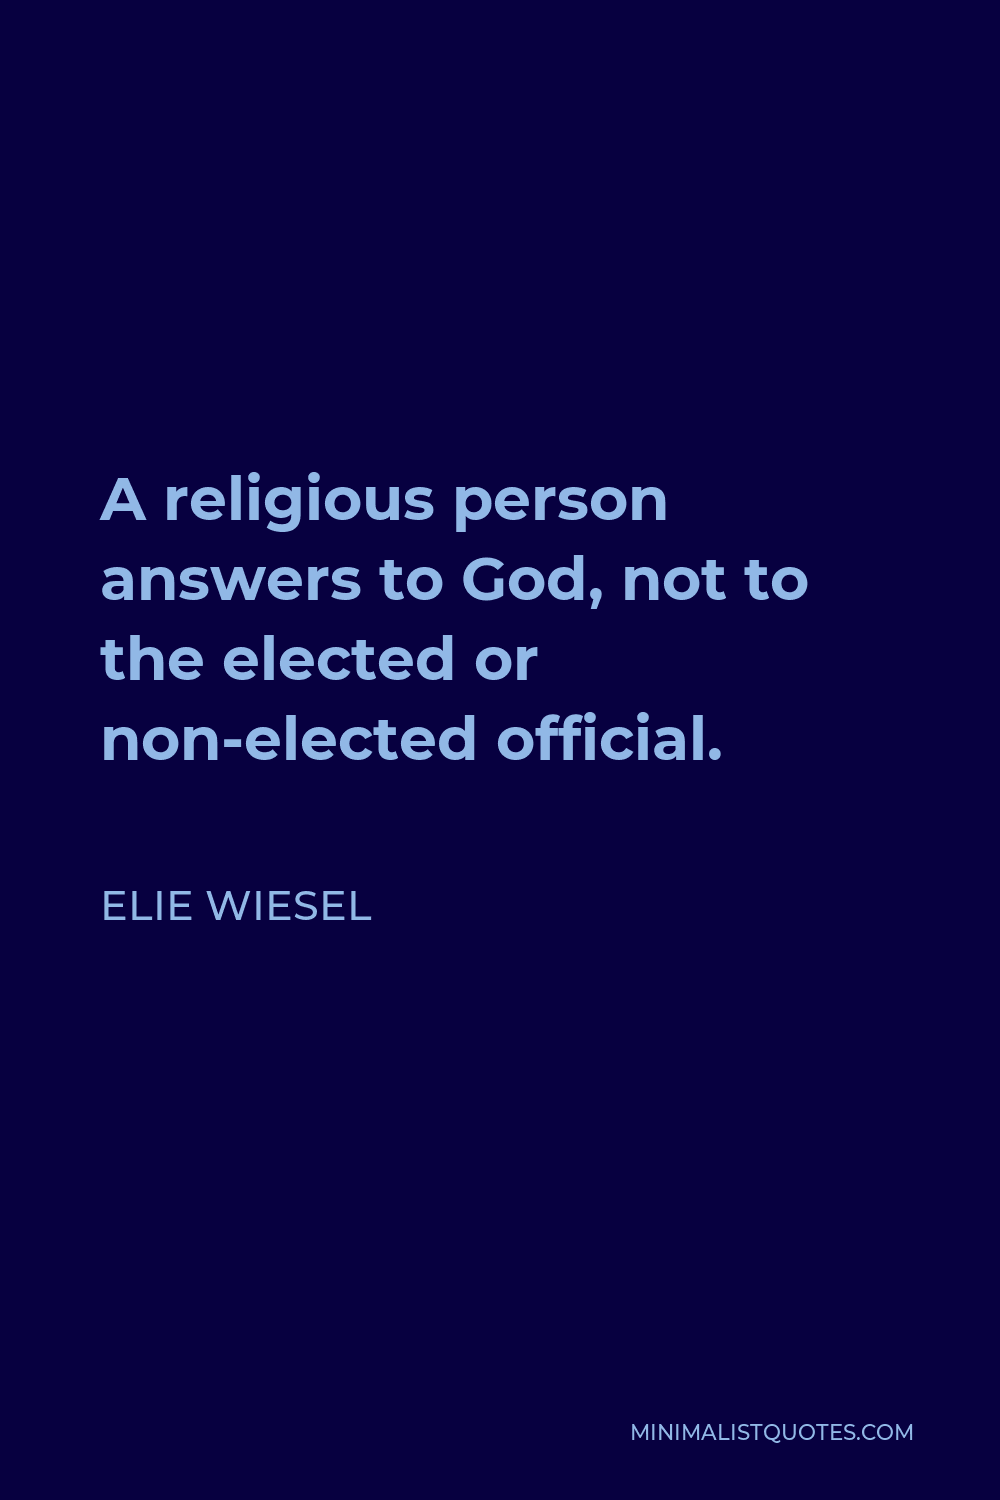 Elie Wiesel Quote - A religious person answers to God, not to the elected or non-elected official.